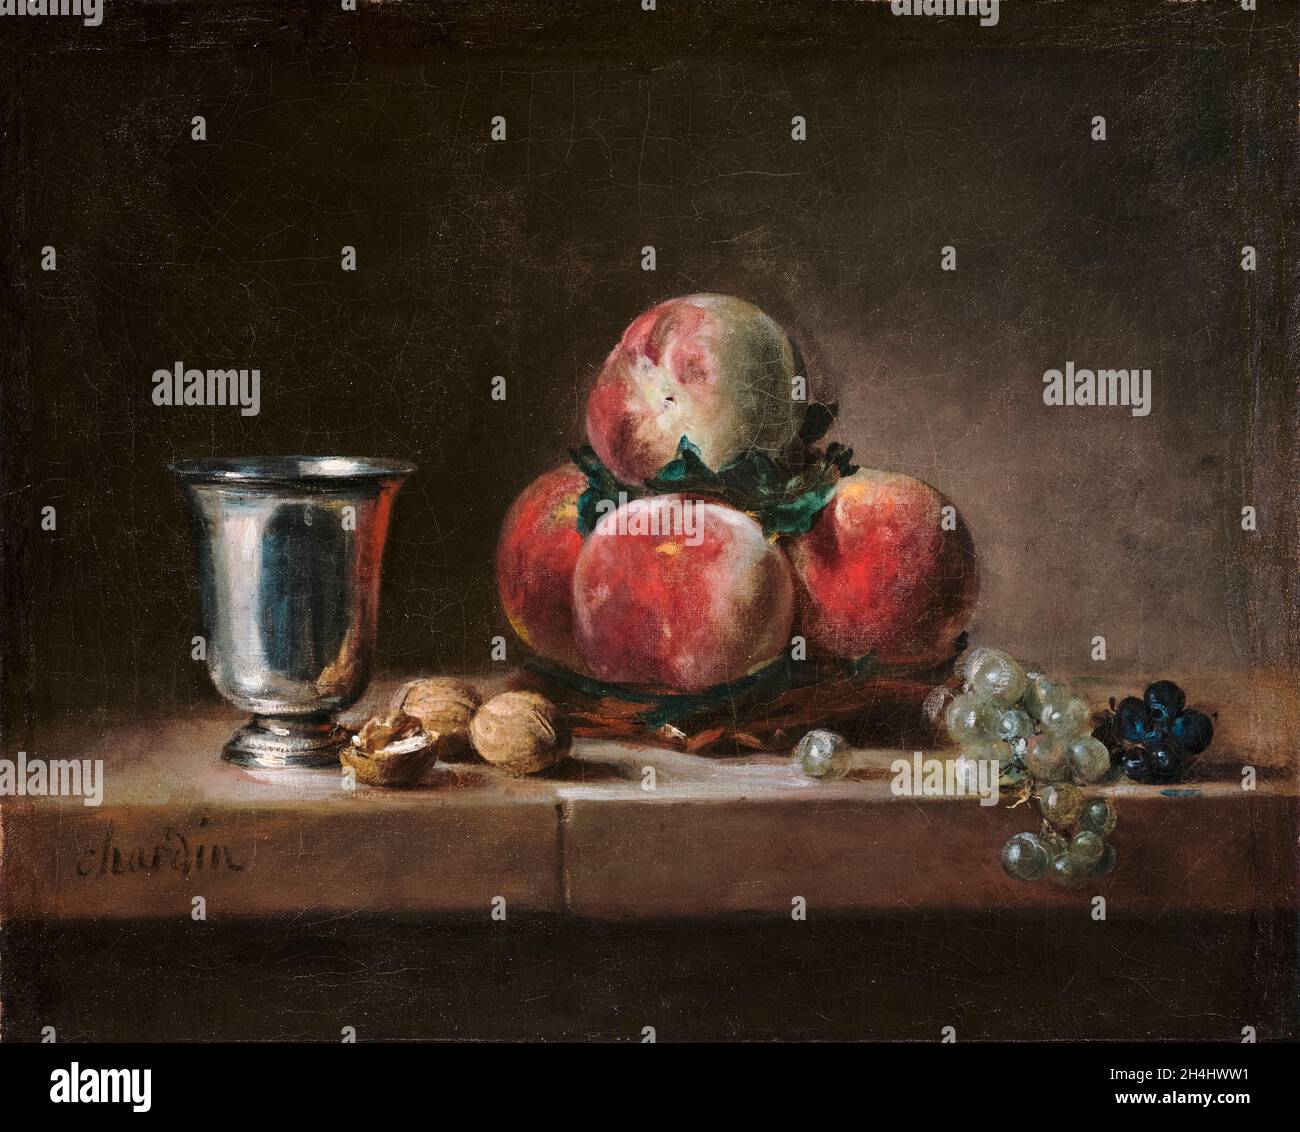 https://c8.alamy.com/comp/2H4HWW1/jean-baptiste-simon-chardin-still-life-with-peaches-a-silver-goblet-grapes-and-walnuts-painting-1759-1760-2H4HWW1.jpg